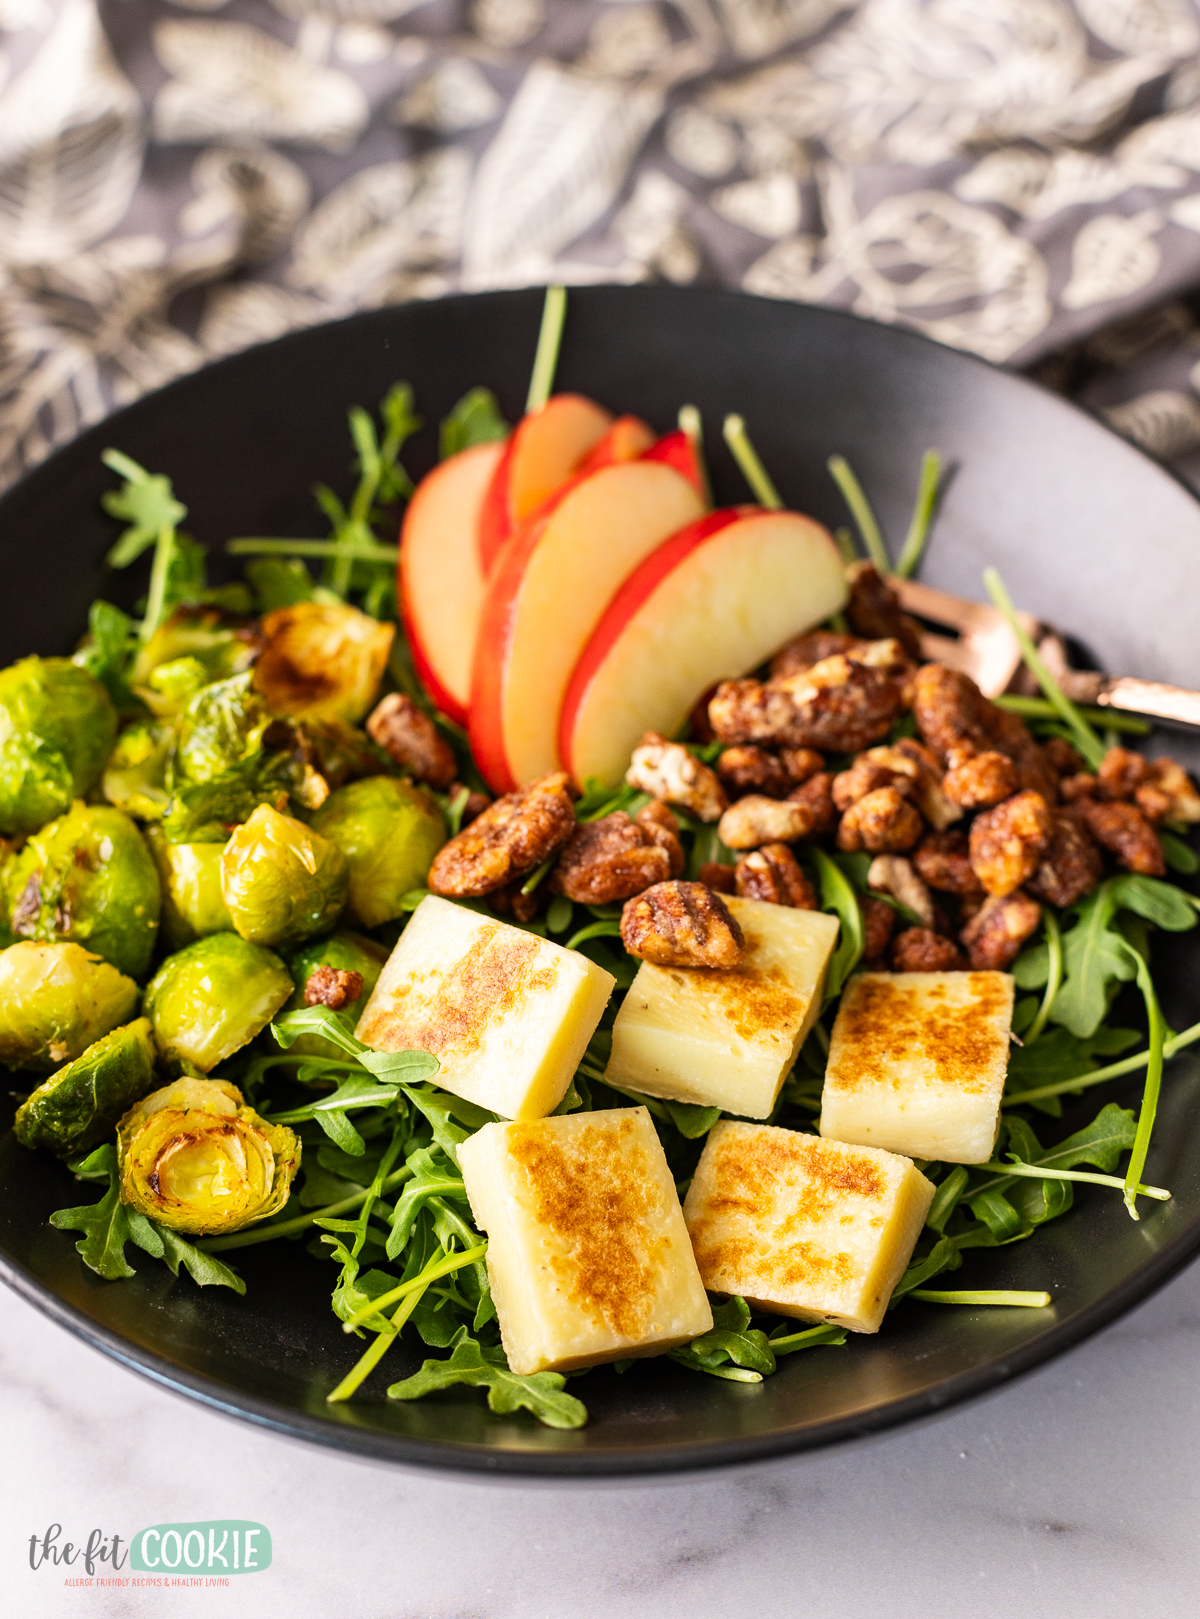 A winter salad in a black bowl filled with apples, brussel sprouts, and dairy free grilling cheese.